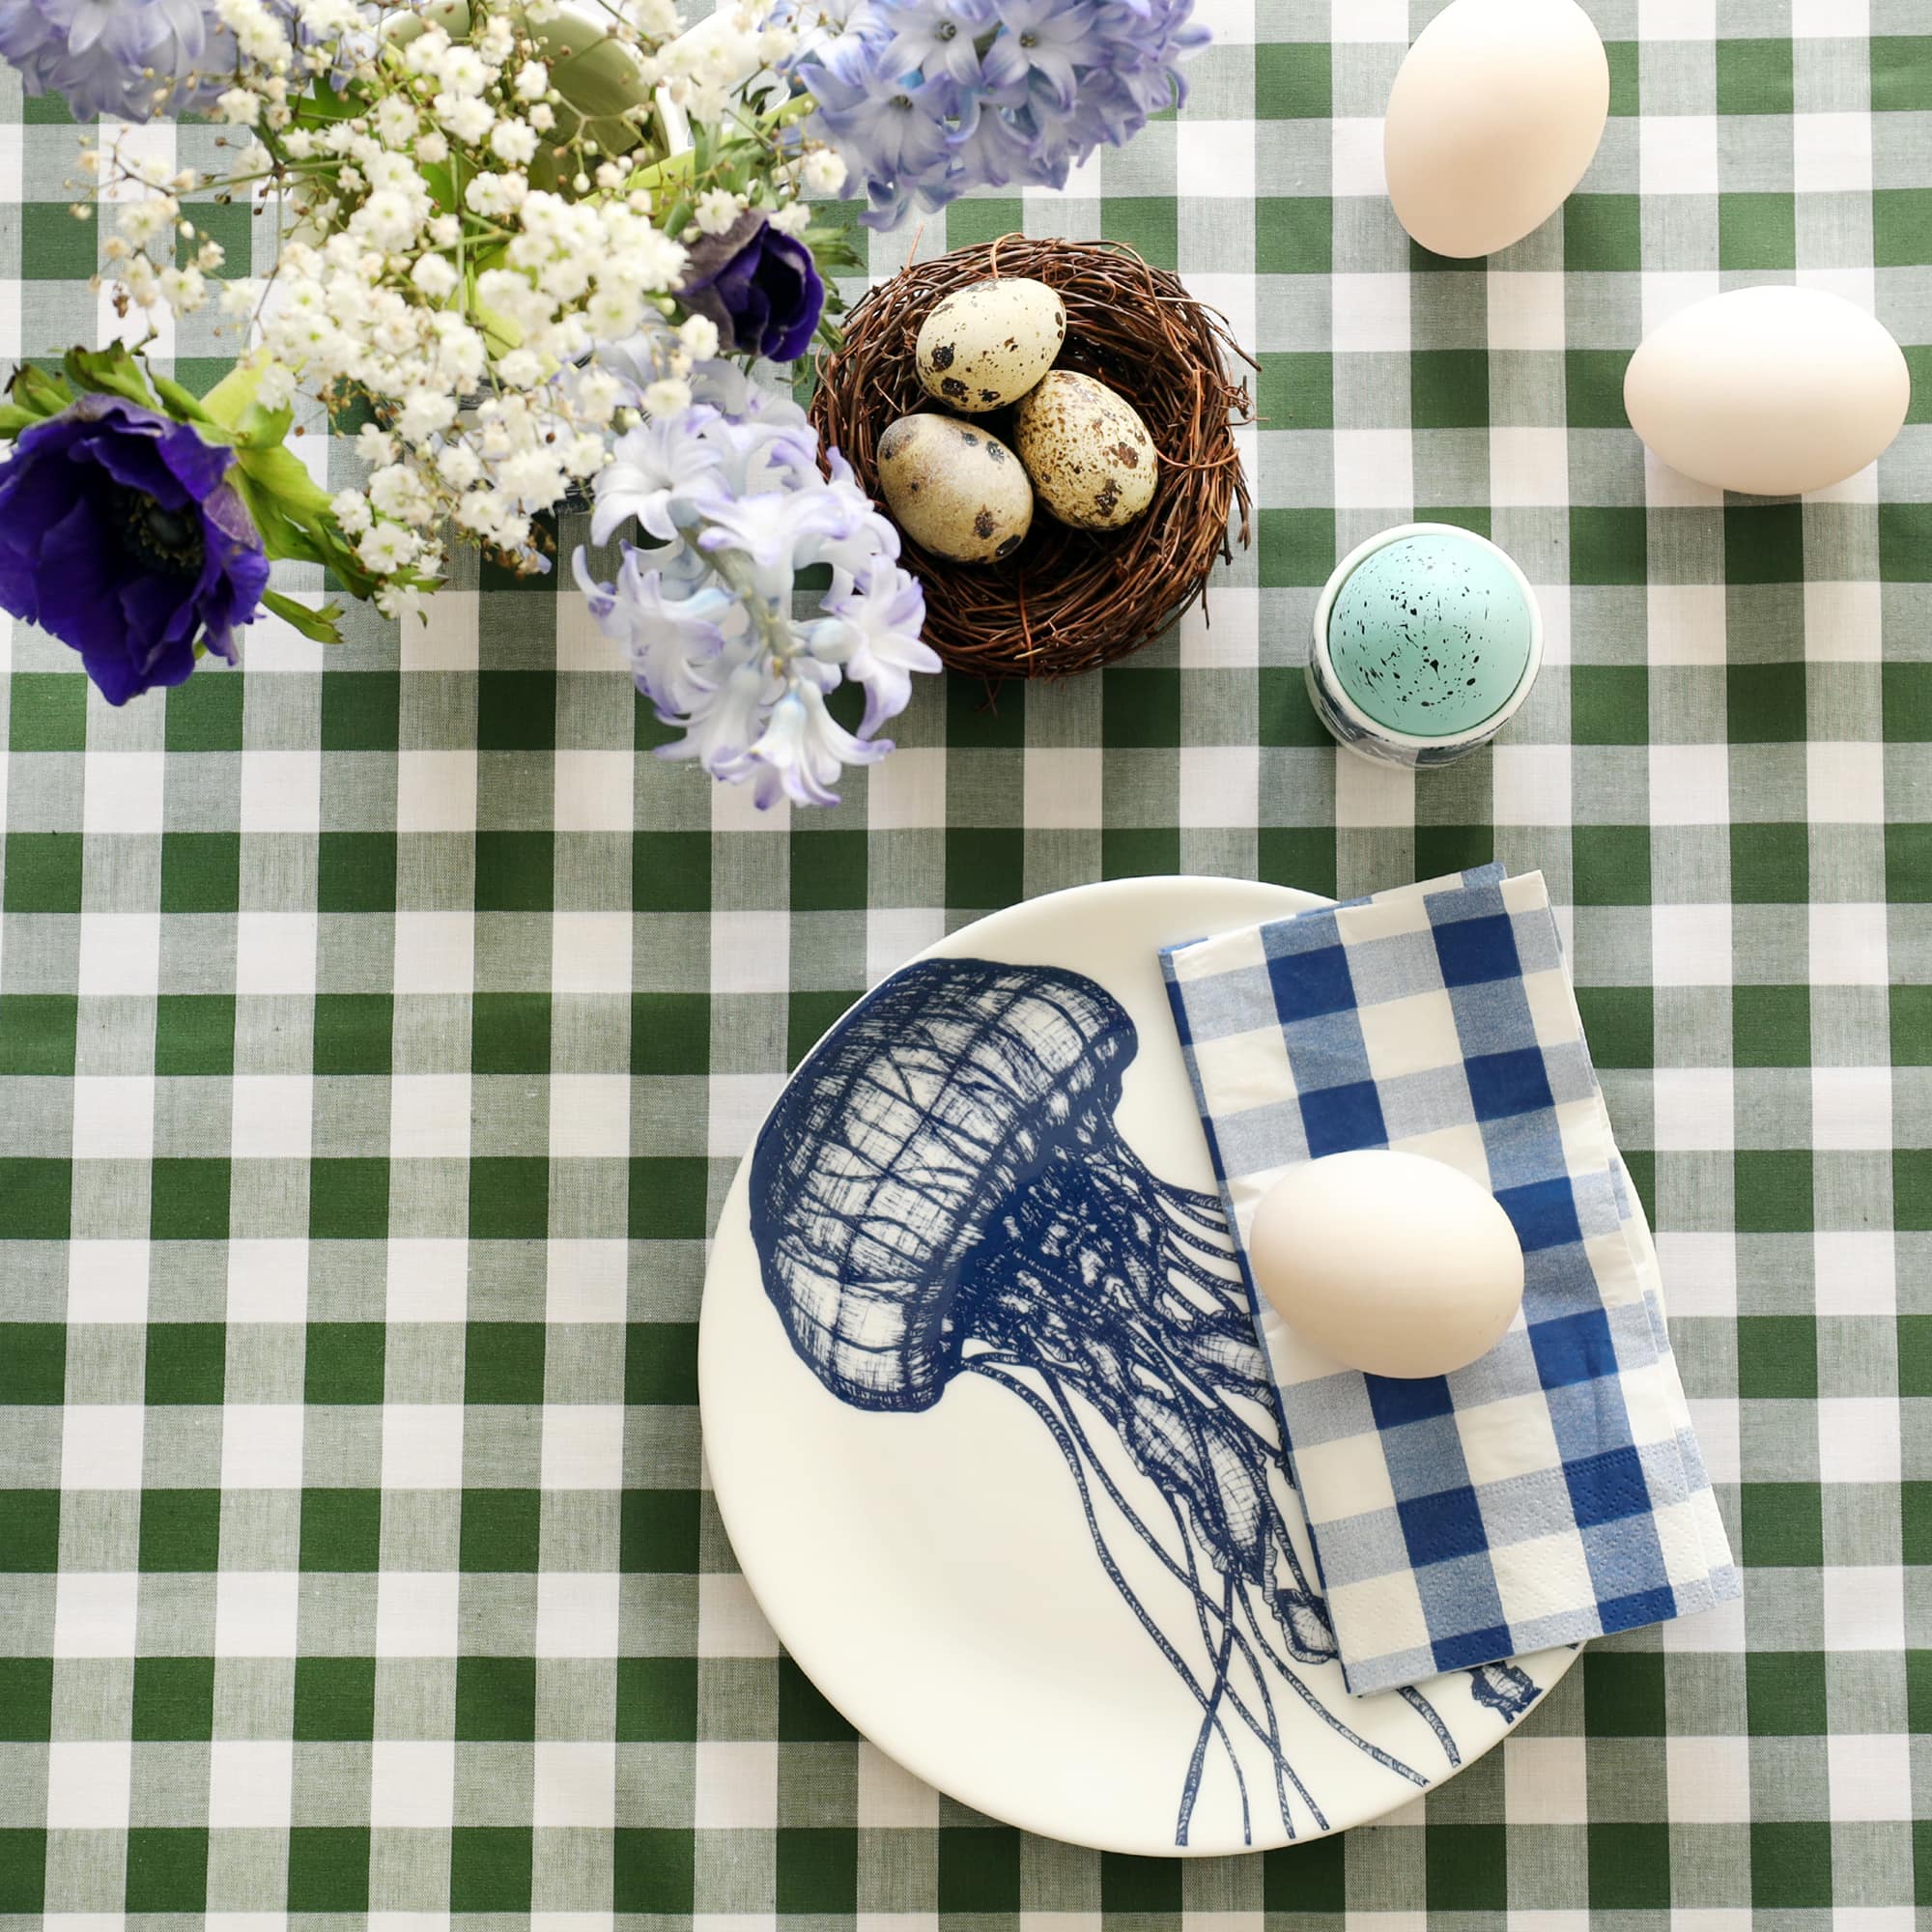 Bone china plate with illustration of jellyfish in navy. There is a fold blue gingham napkin and duck egg on the plate. The plate is on a green gingham tablecloth with a small nest and quails eggs and there are hyacinths and anemones in a jug.